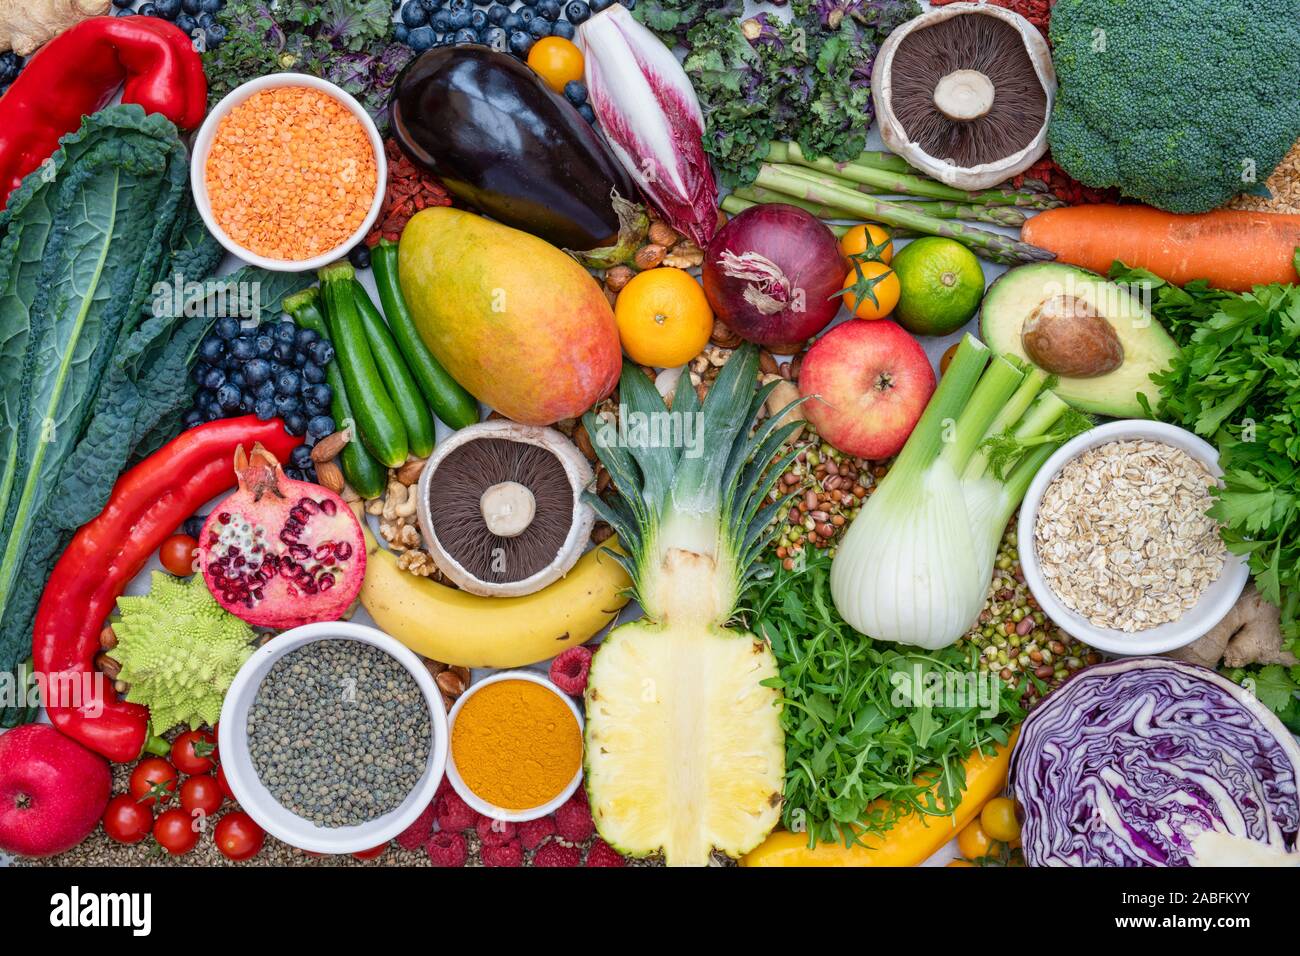 Vegan. Fruit vegetables lentils spices herbs nuts and seeds on a white slate background Stock Photo